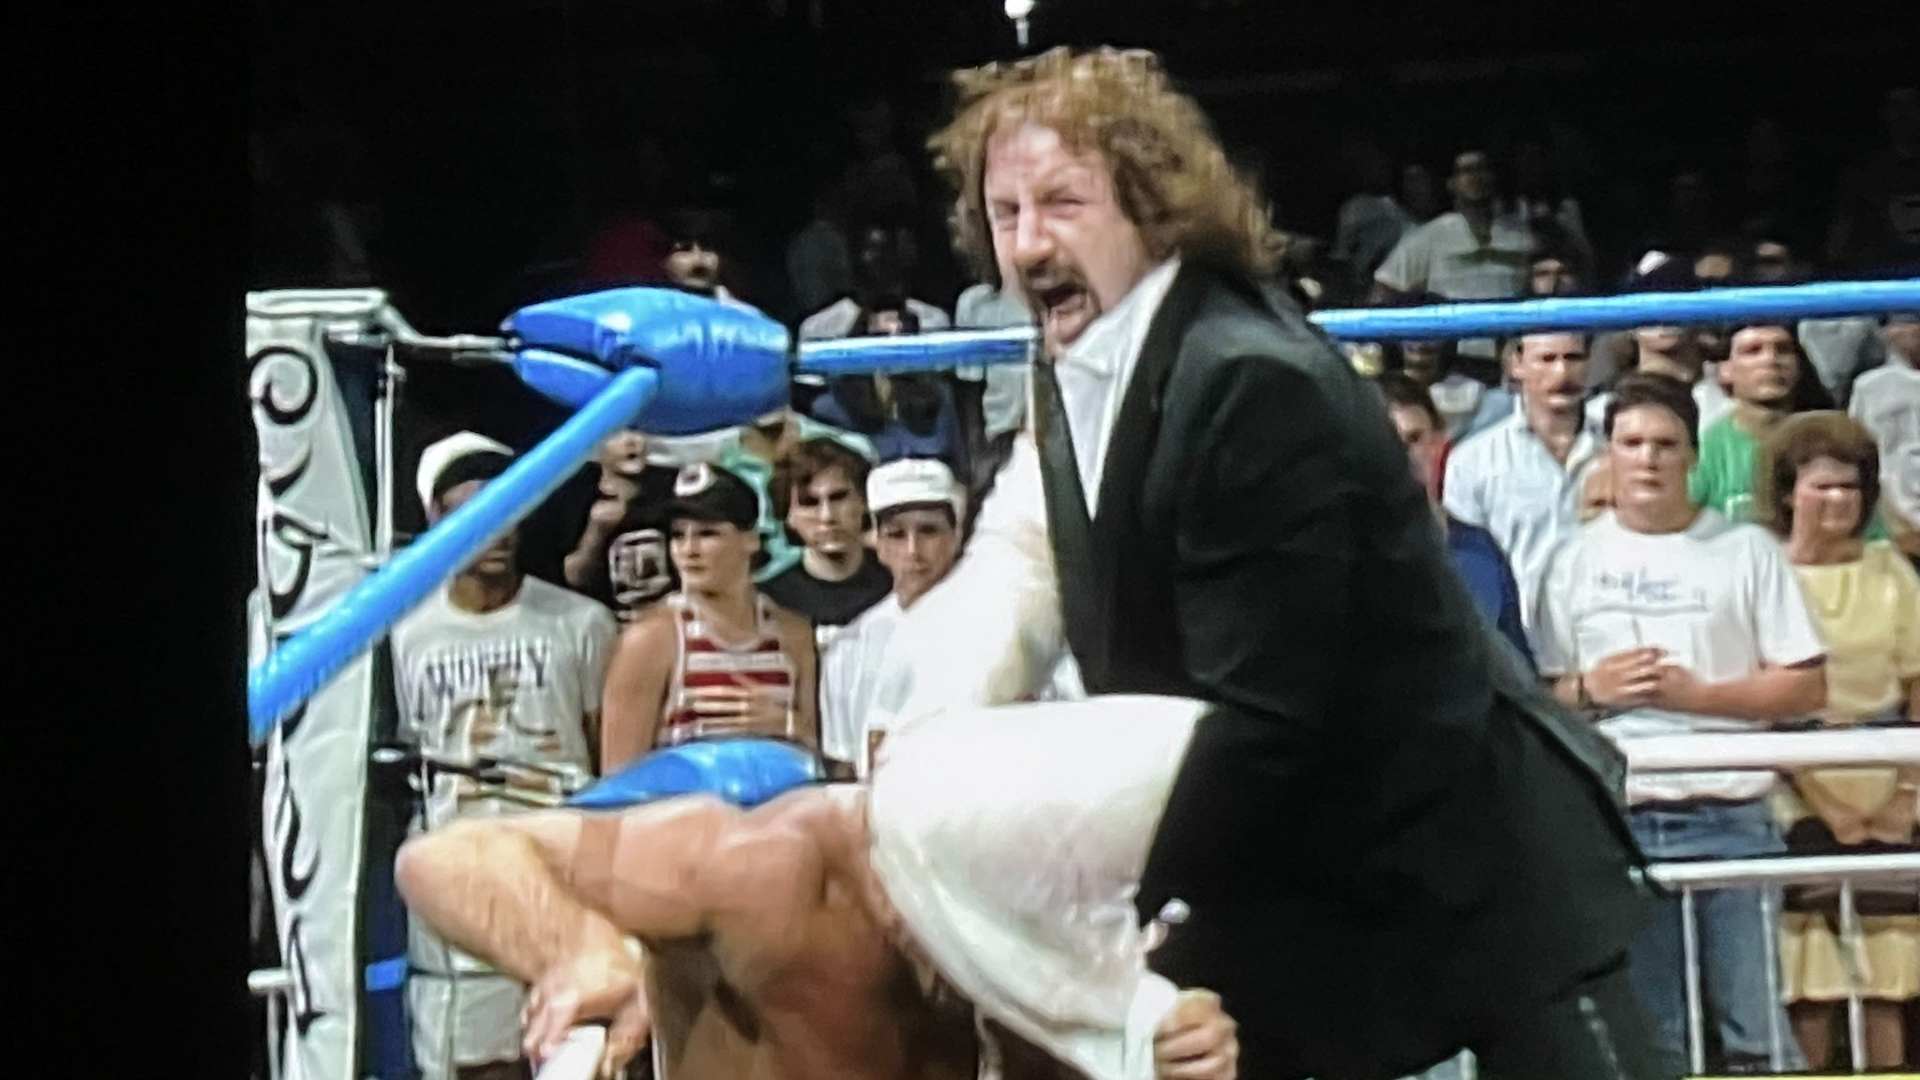 Terry Funk Vs Rick Flair And Other Rivalries In Wwe